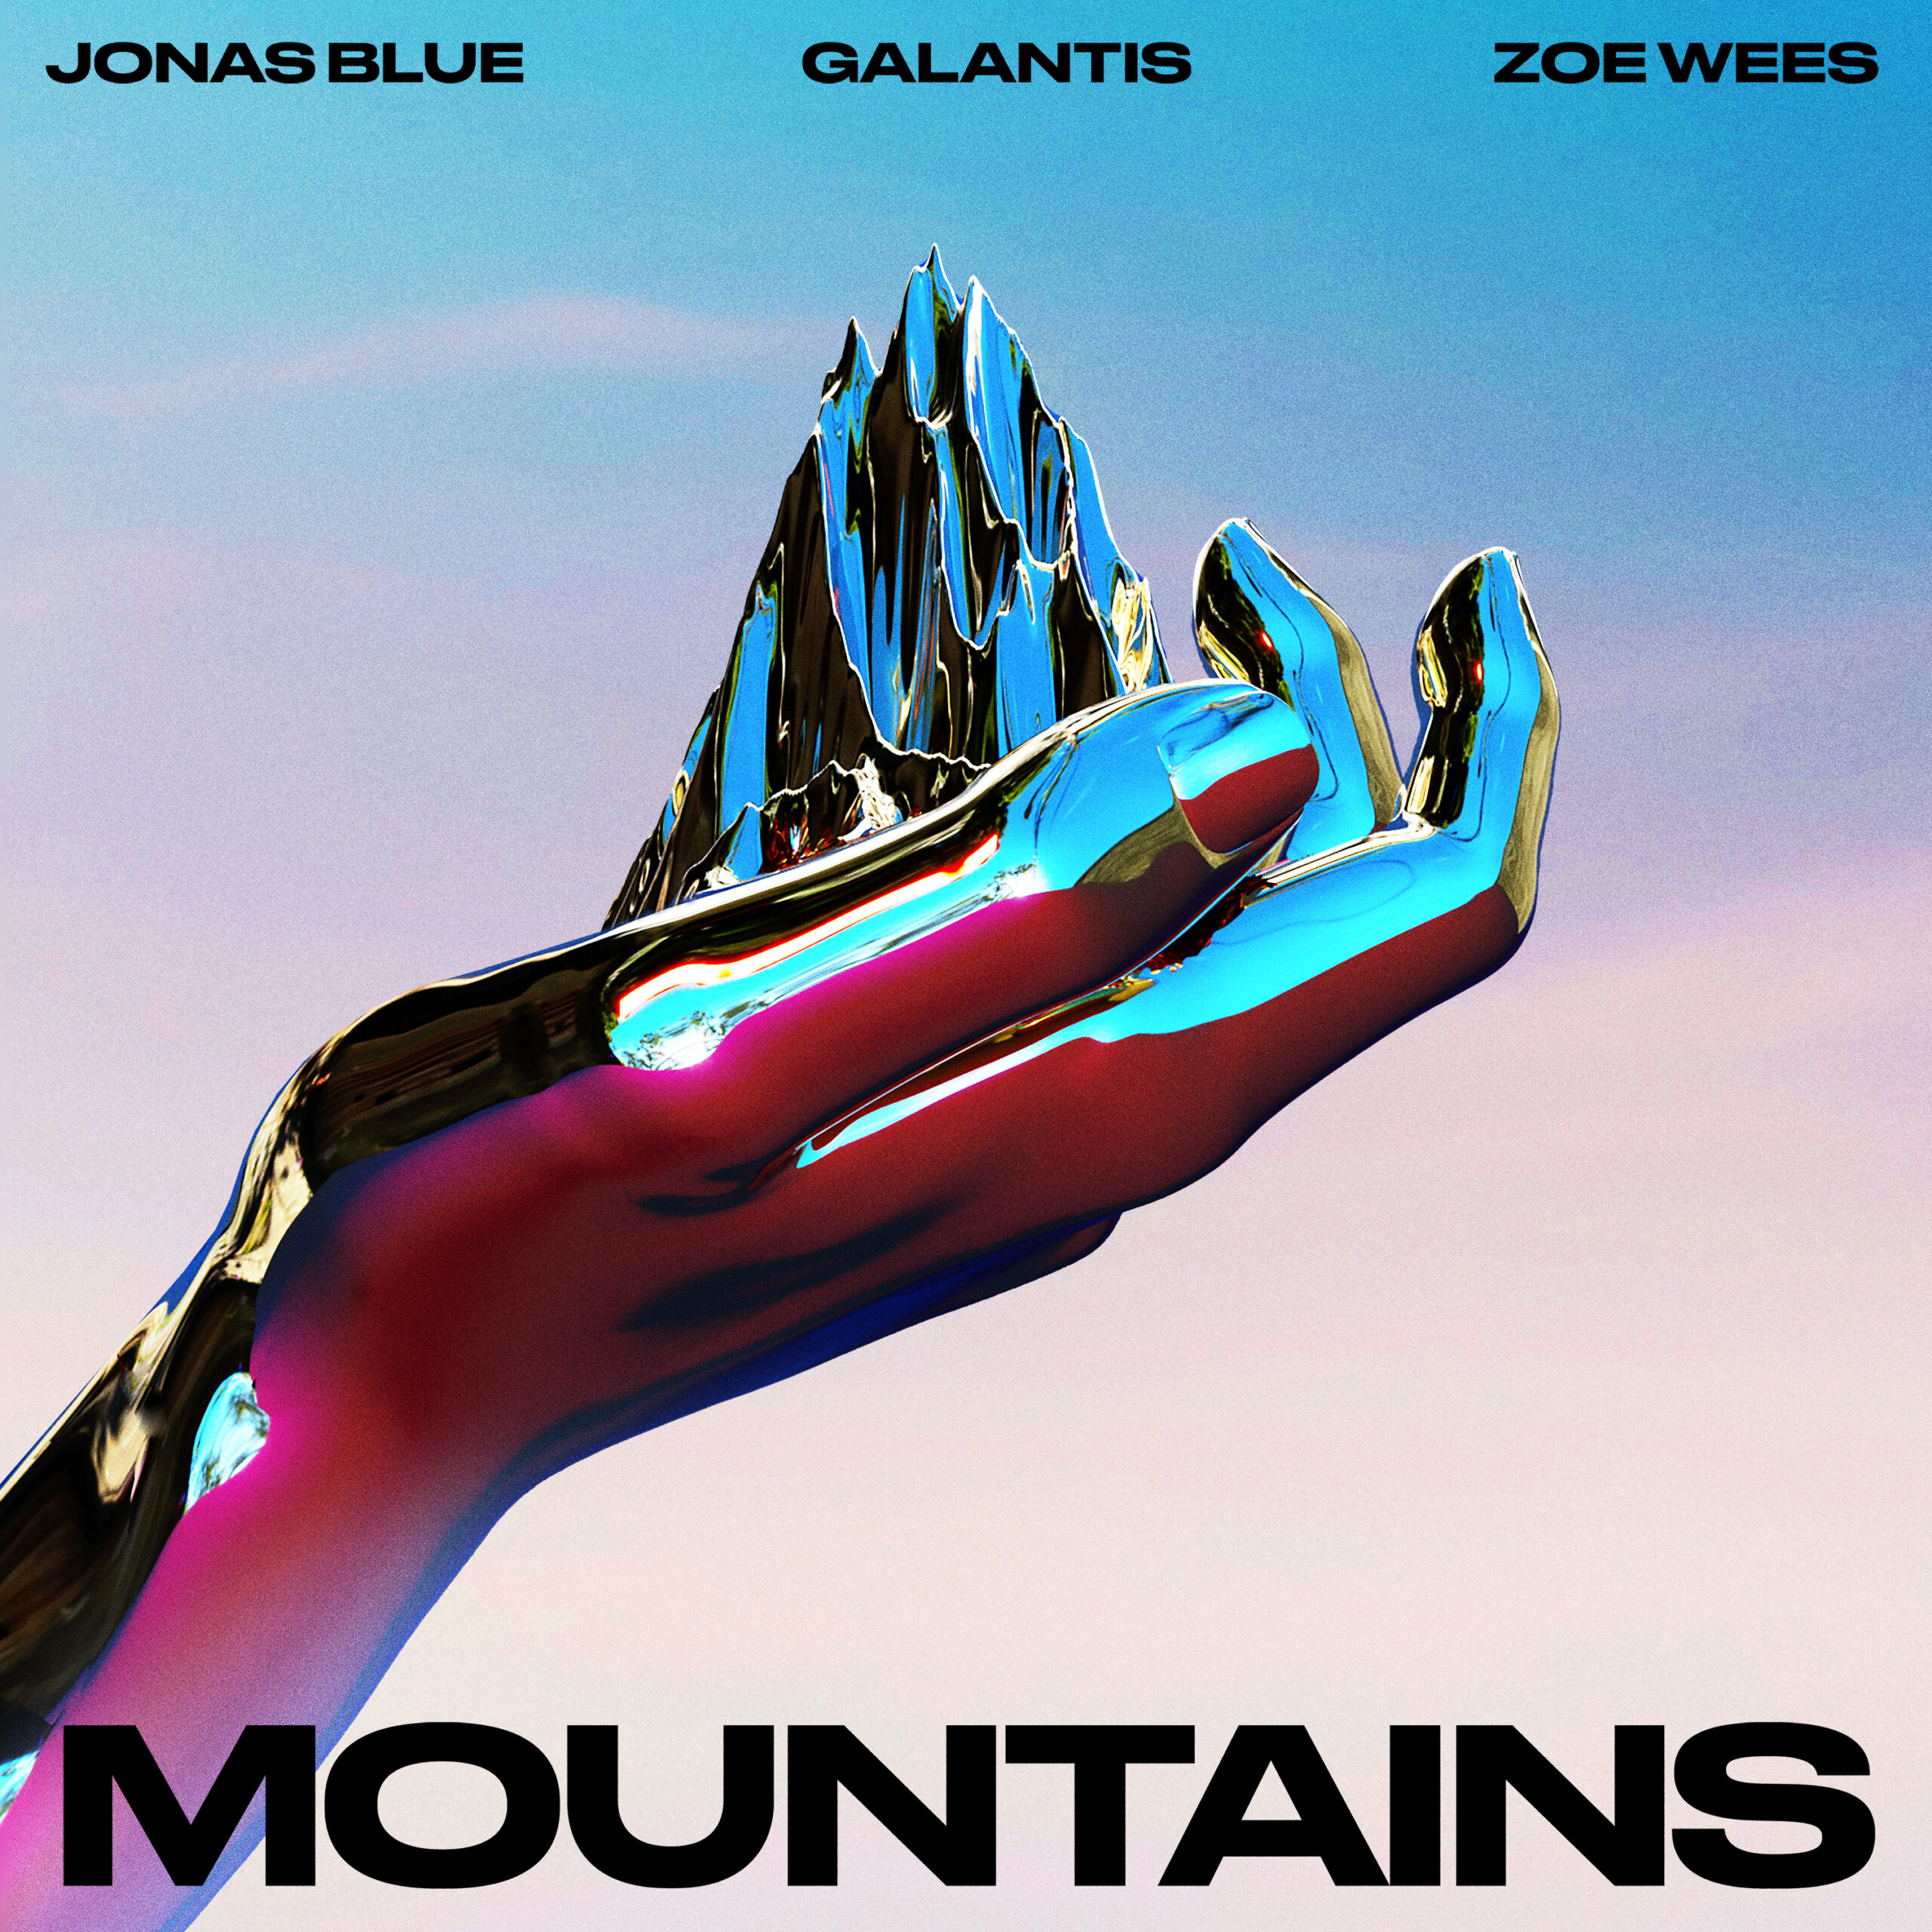 Jonas Blue links up with Galantis & Zoe Wees on new summer classic ‘Mountains’